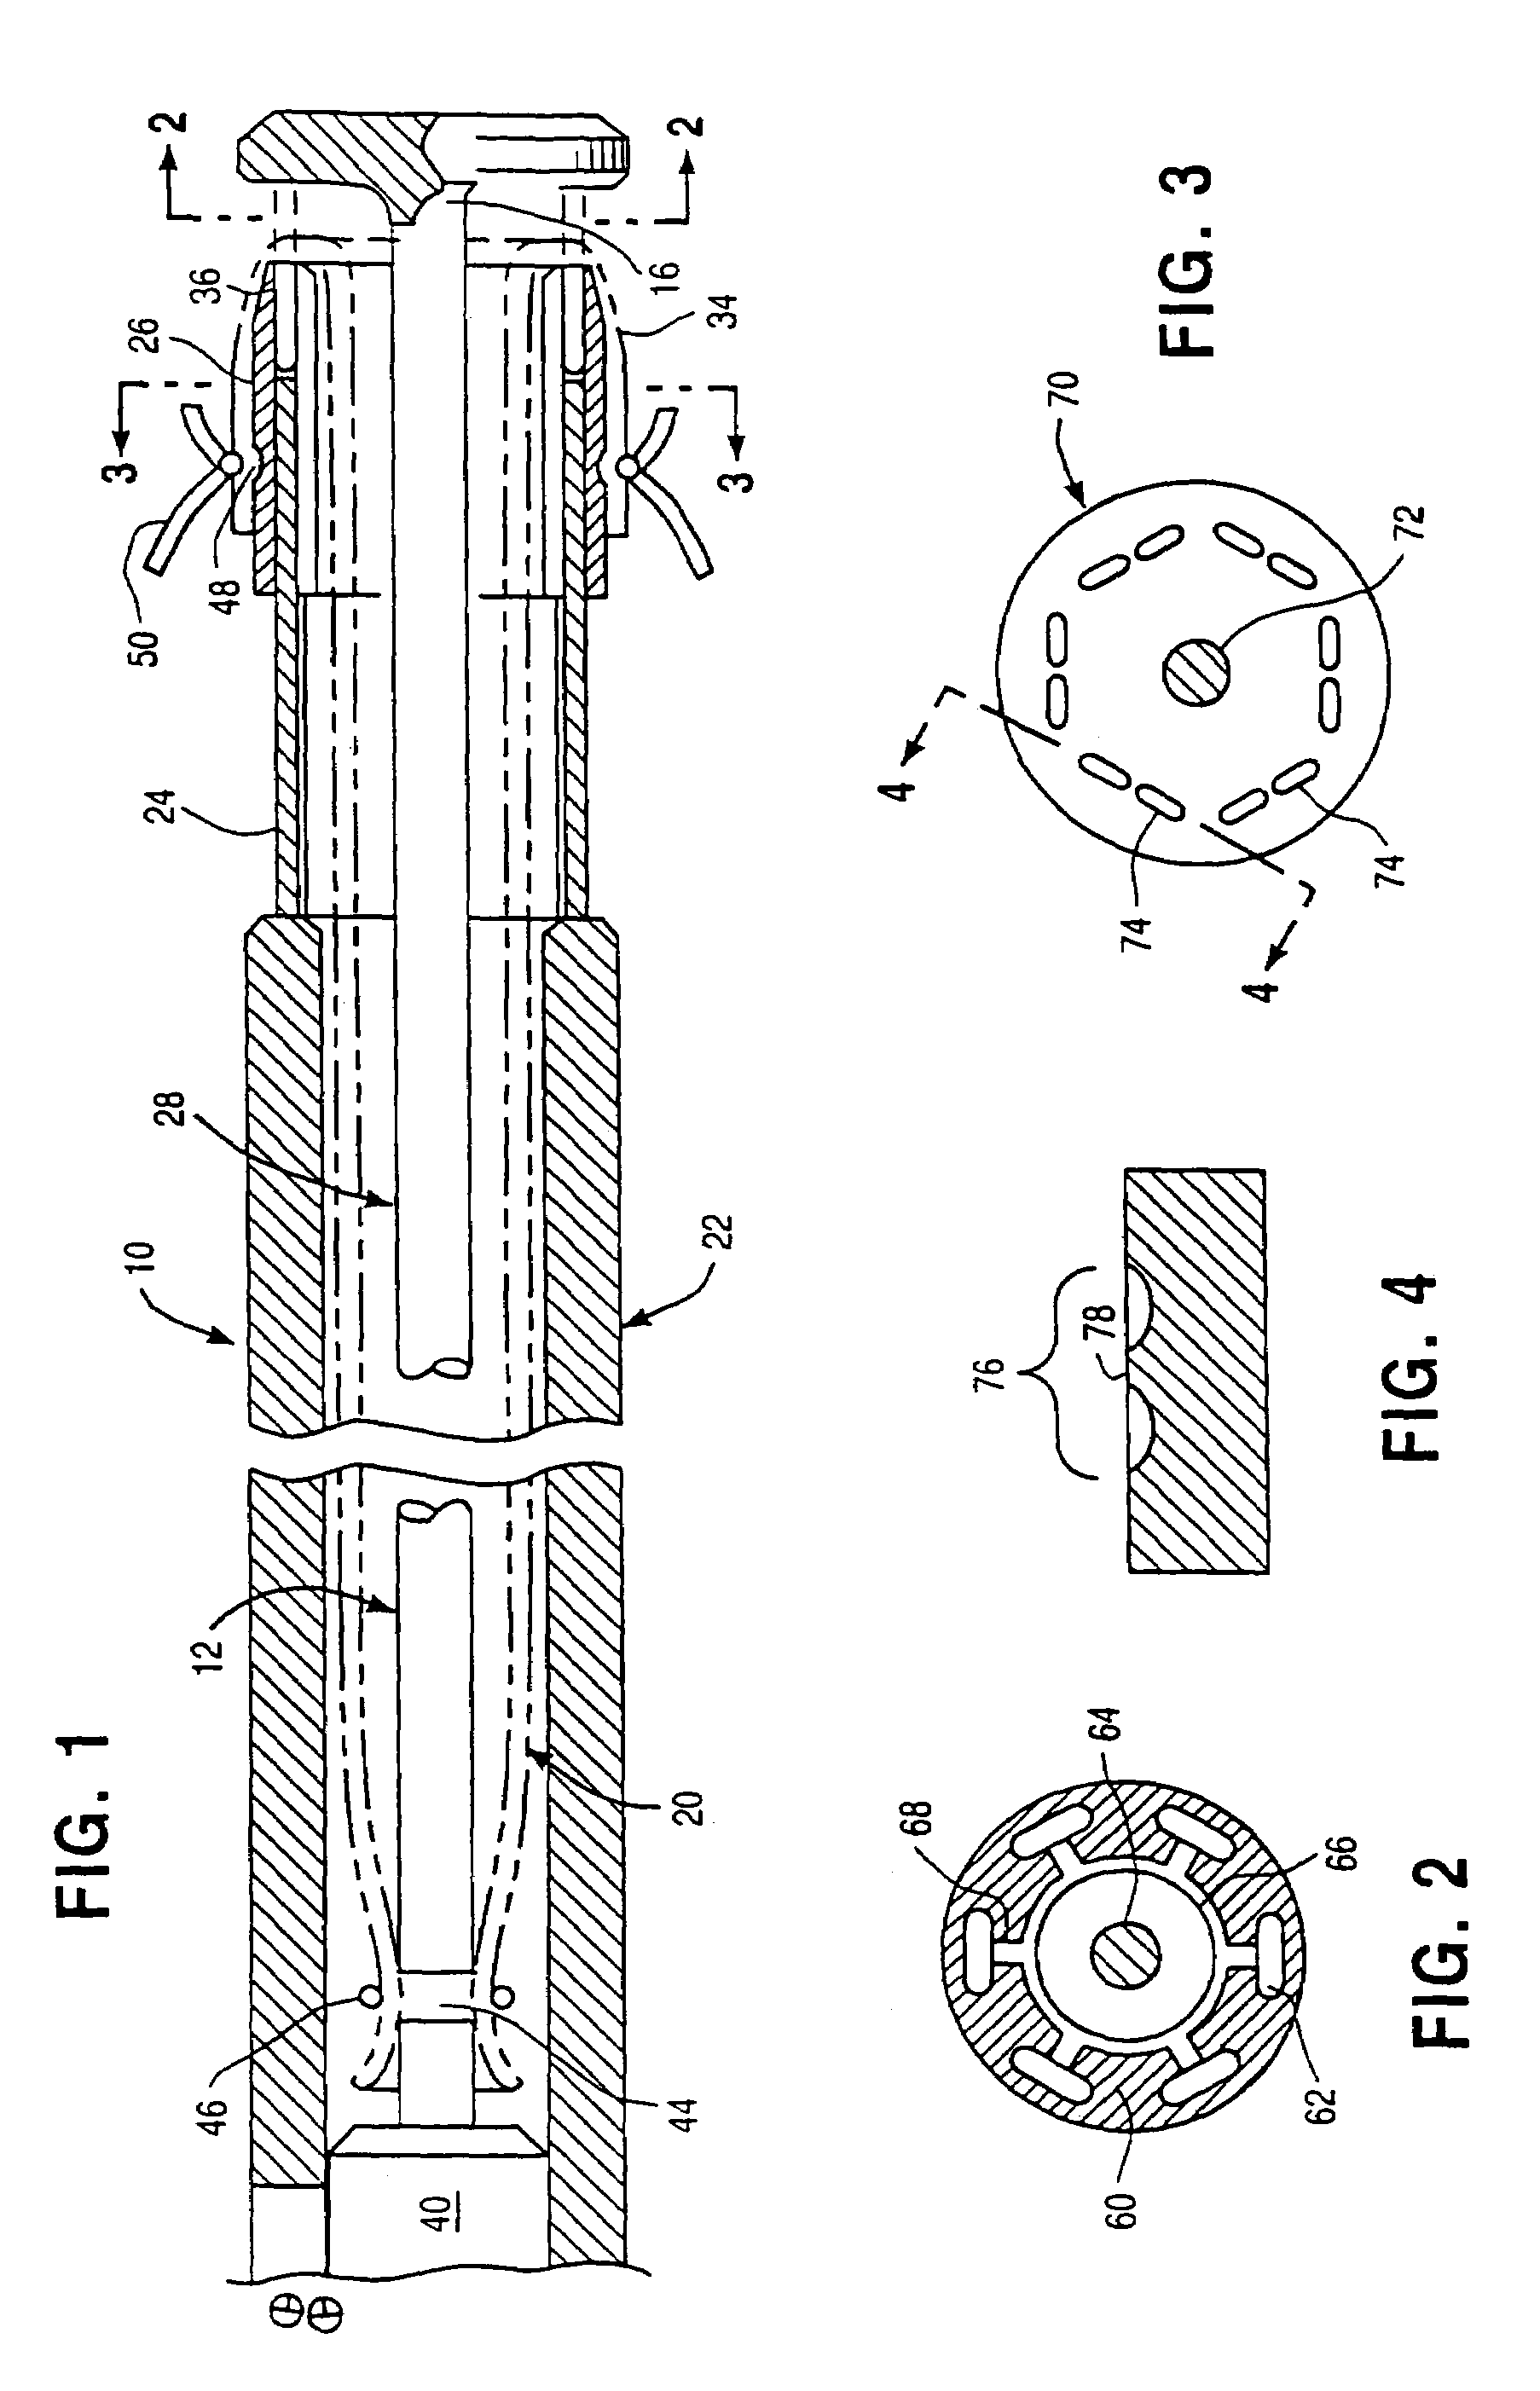 Surgical stapling instrument and method thereof